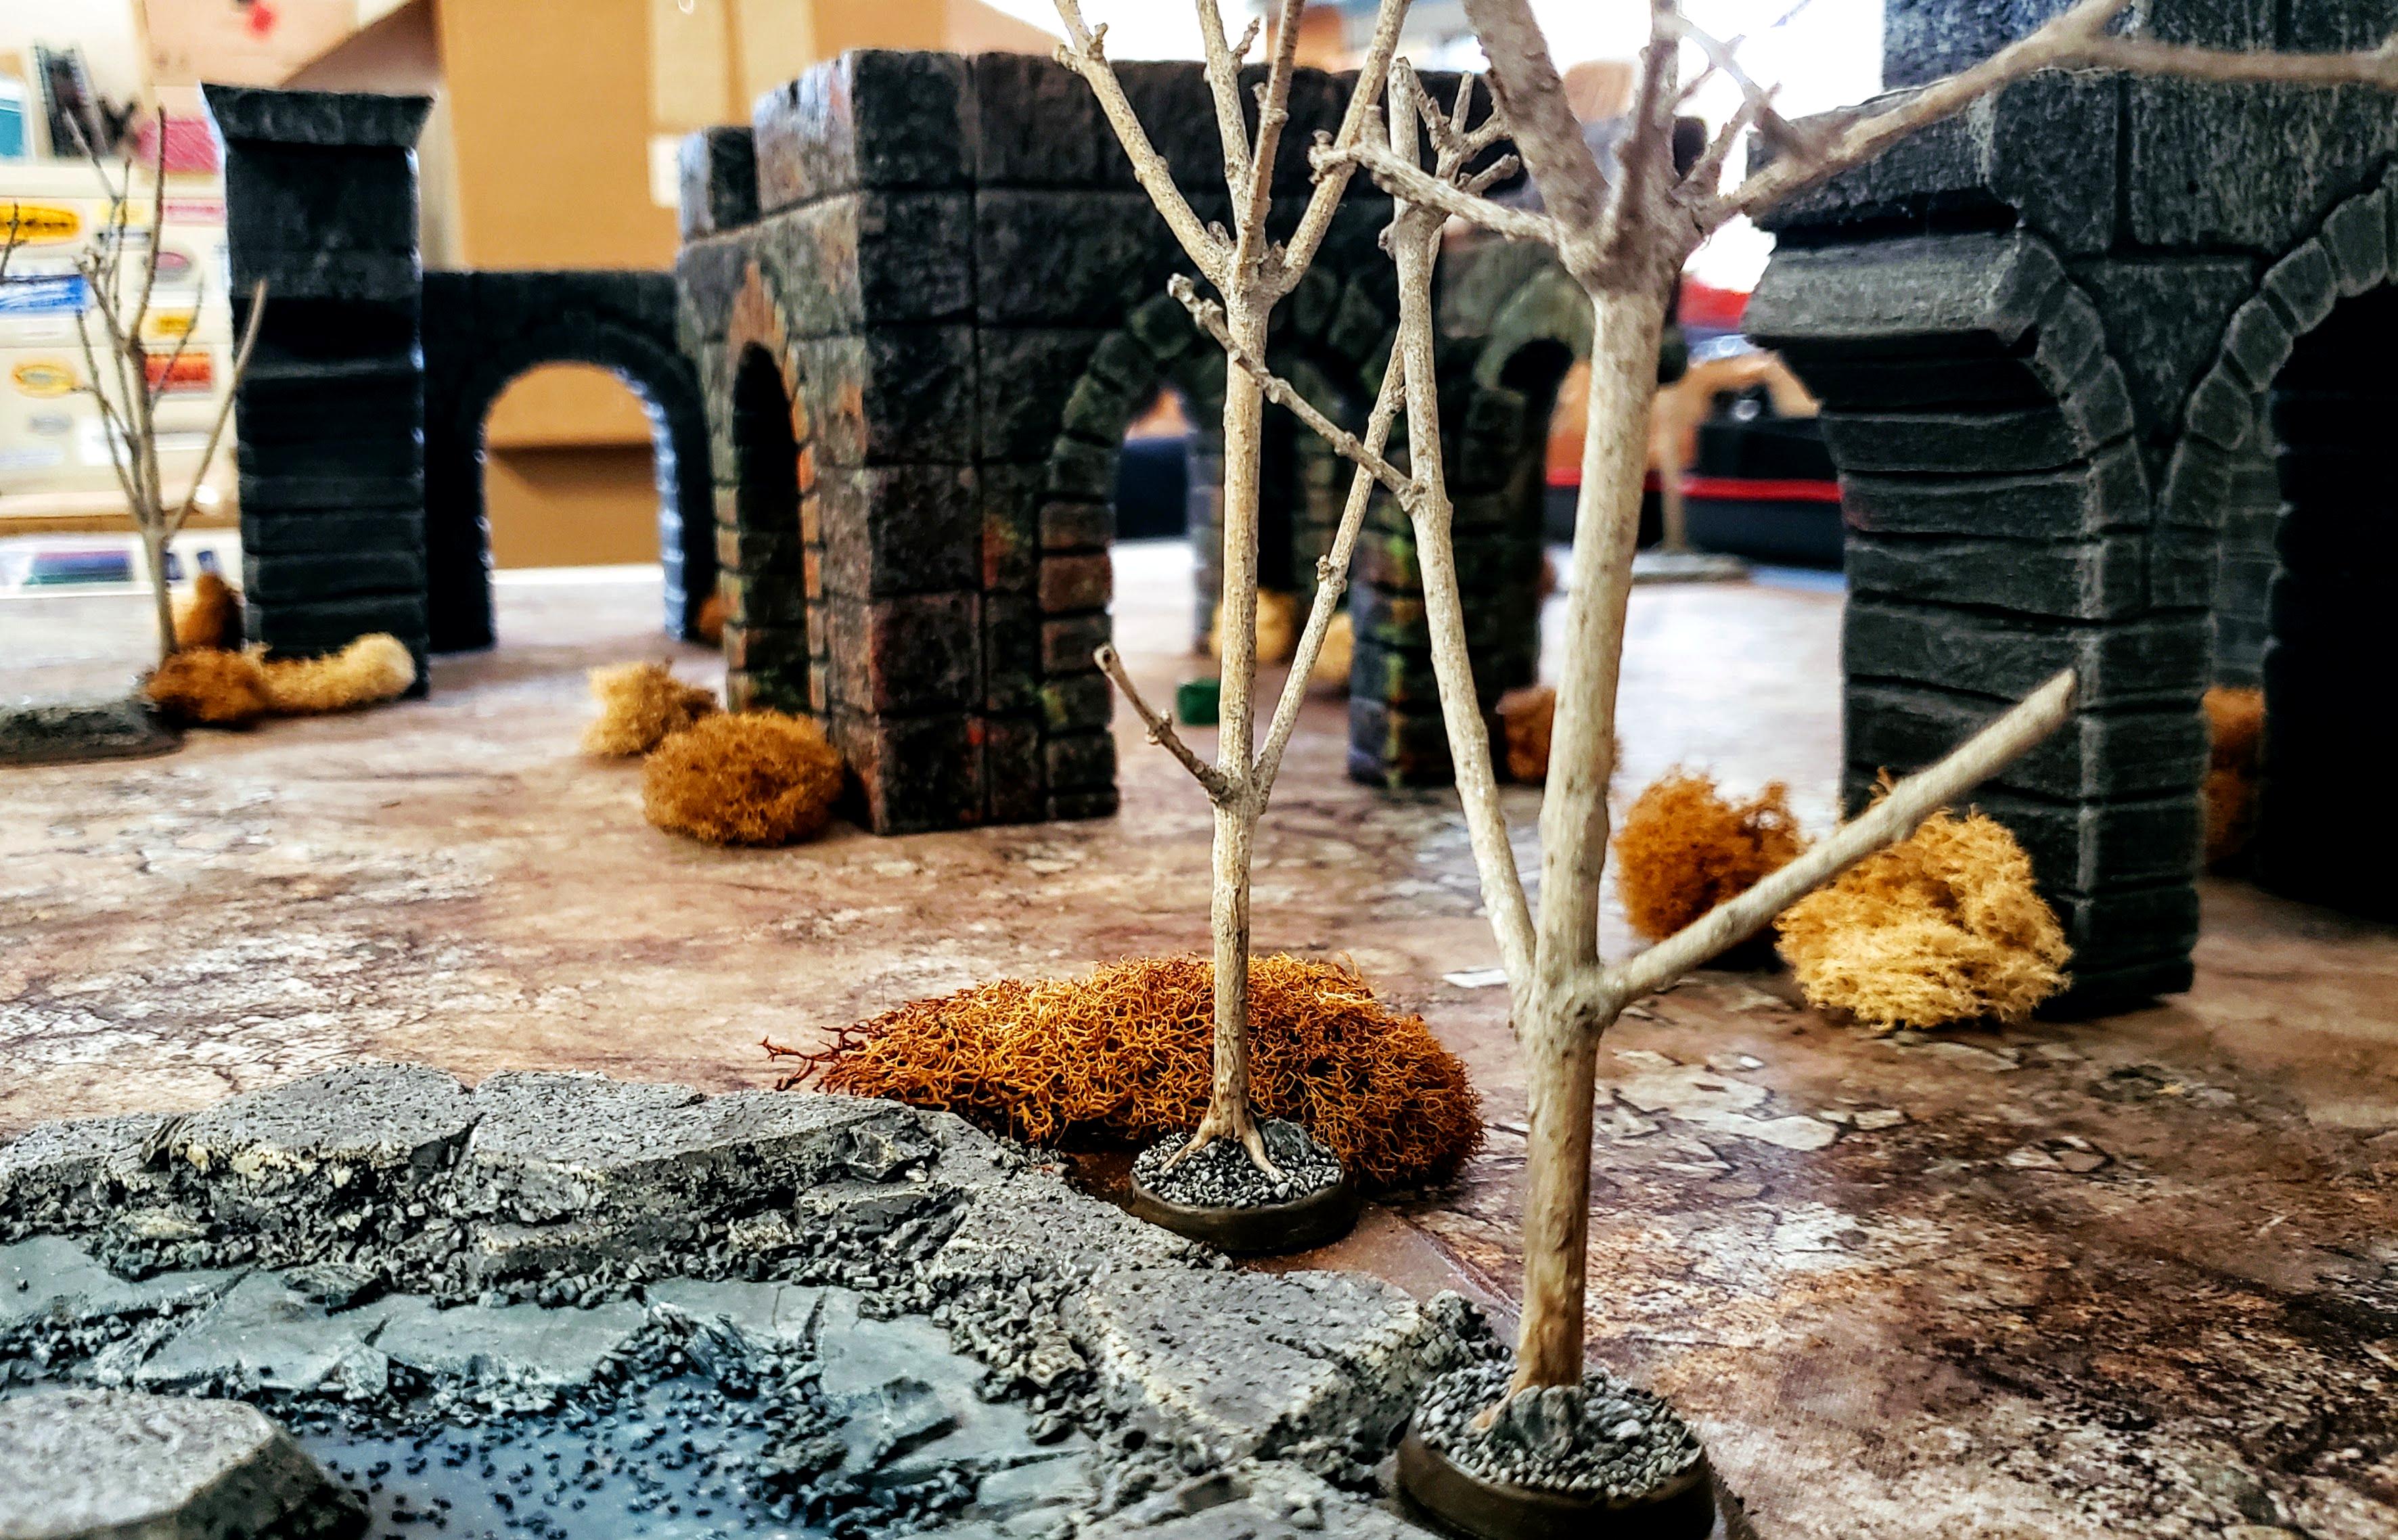 The ruined arches finally make it to the tabletop